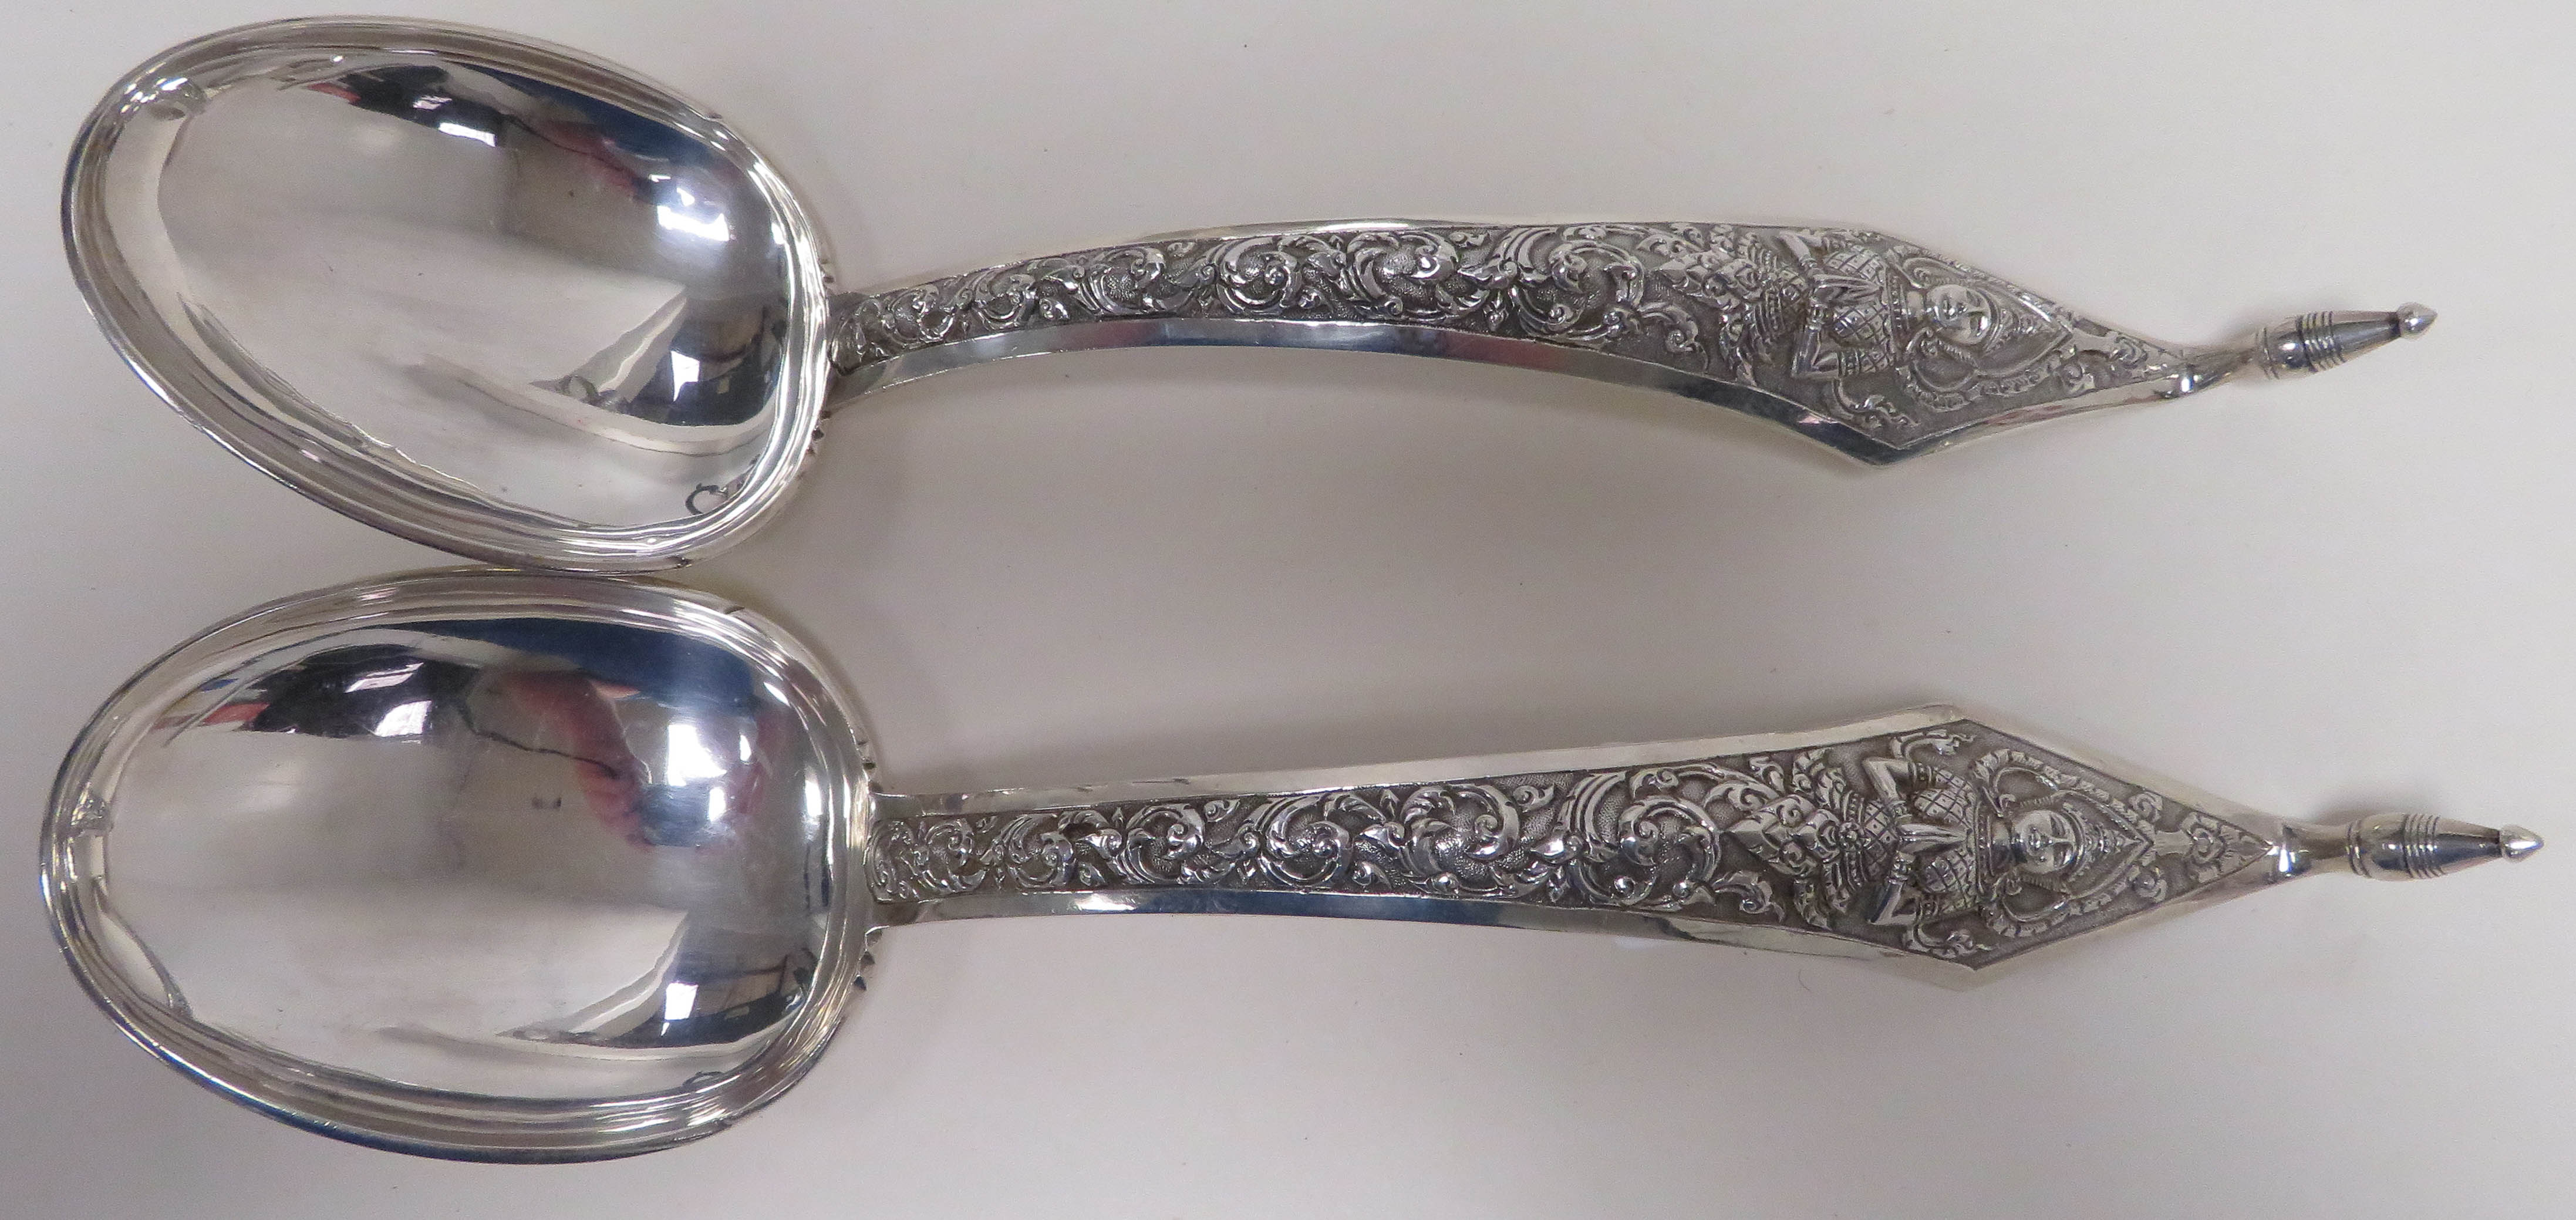 Pair of Thai Silver Spoons - Image 3 of 4